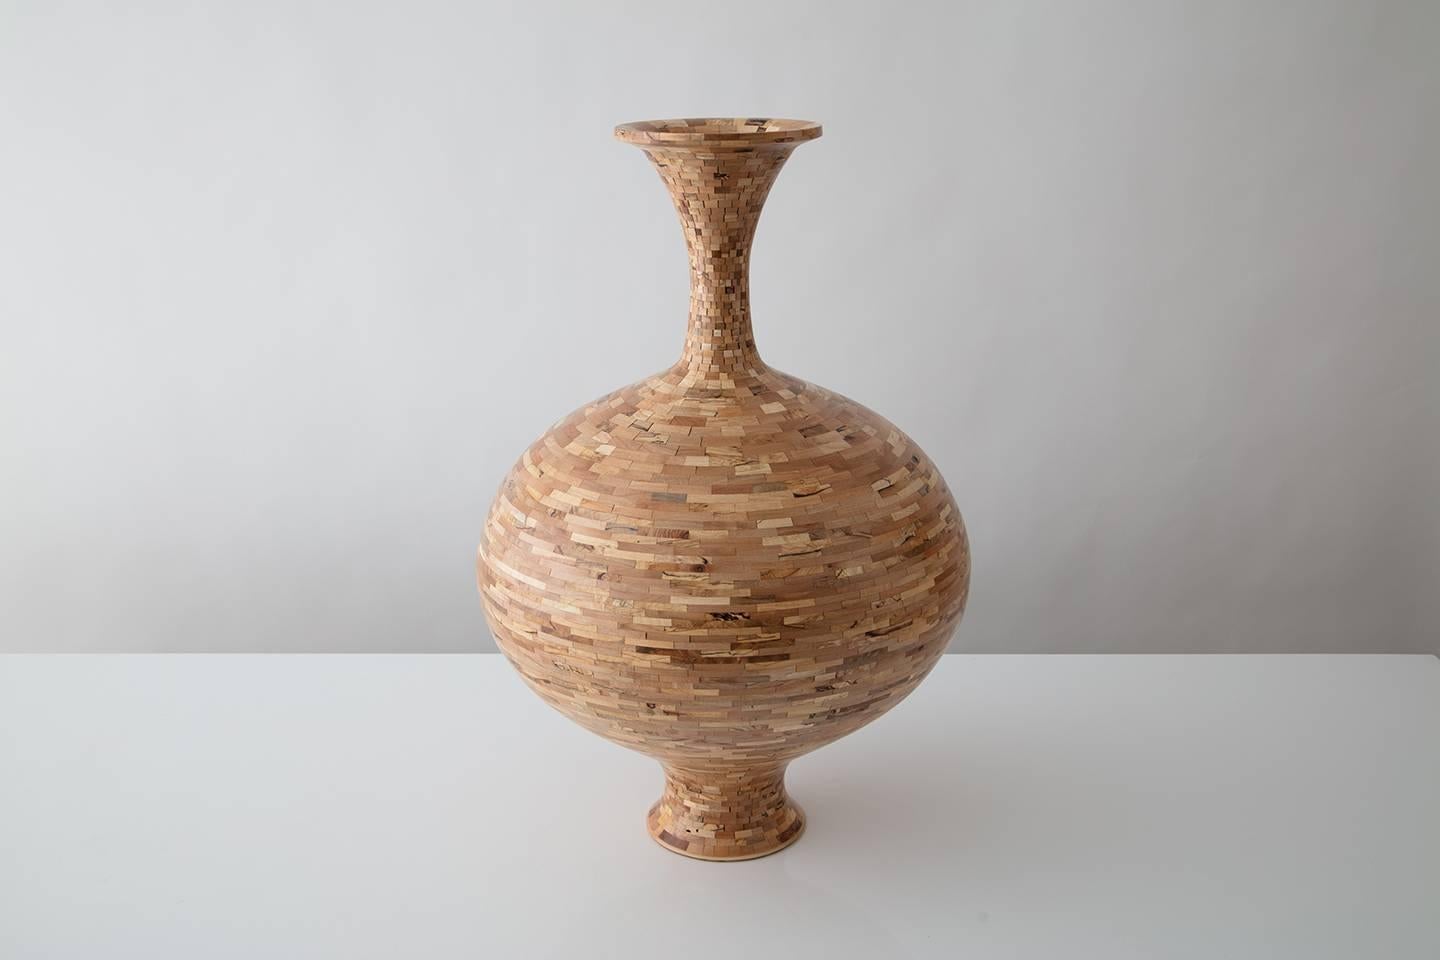 Part of Richard Haining's STACKED Collection, this vase was made using reclaimed spalted maple salvaged from the offcuts of Brooklyn Museum's seating, reception desks, and signage located in their glass pavilion lobby entrance. The wood's natural